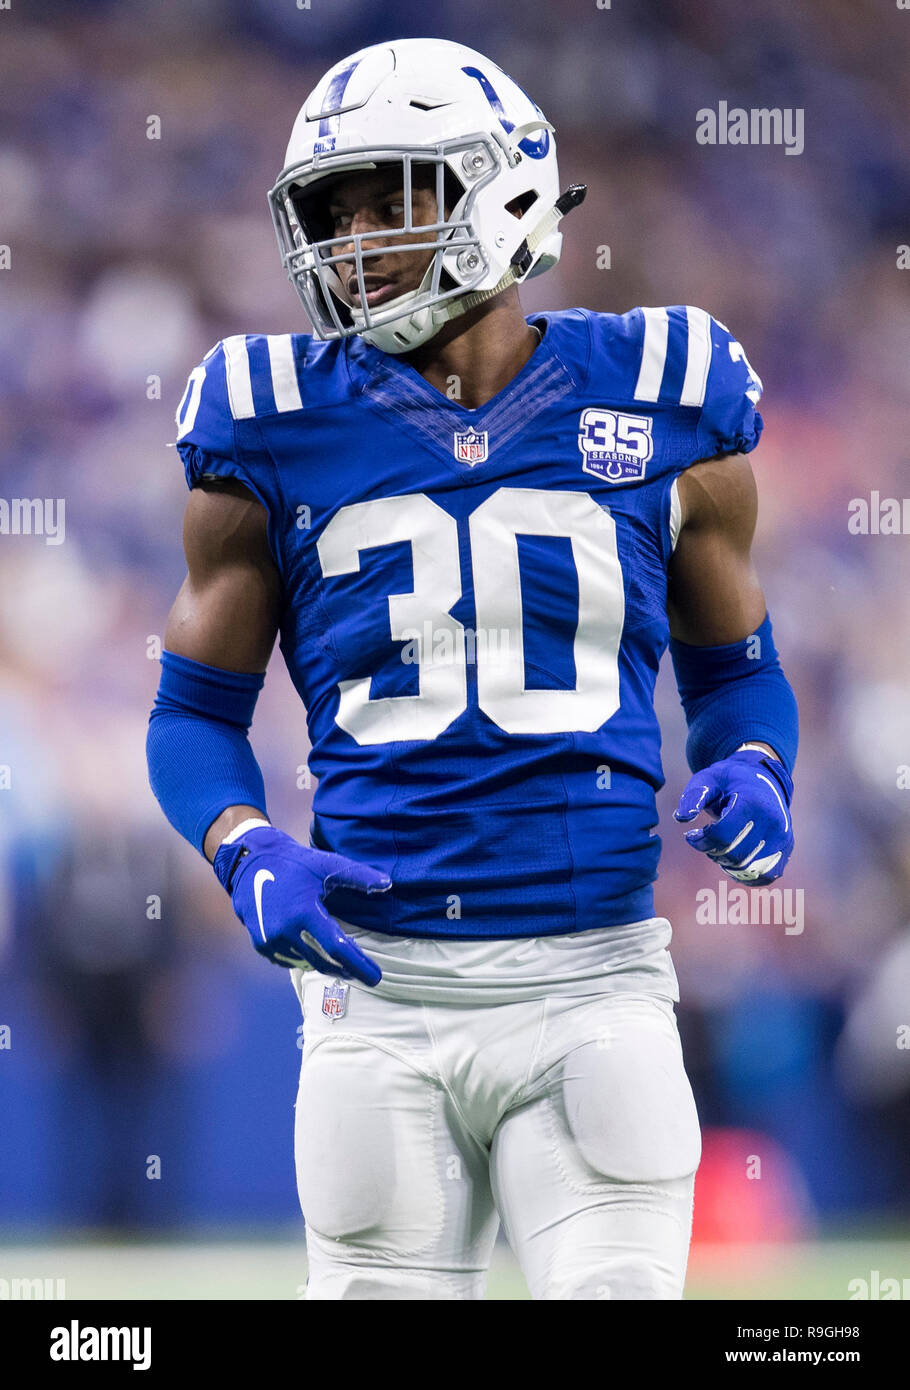 Indianapolis, Indiana, USA. 23rd Dec, 2018. Indianapolis Colts safety  George Odum (30) during NFL football game action between the New York Giants  and the Indianapolis Colts at Lucas Oil Stadium in Indianapolis,